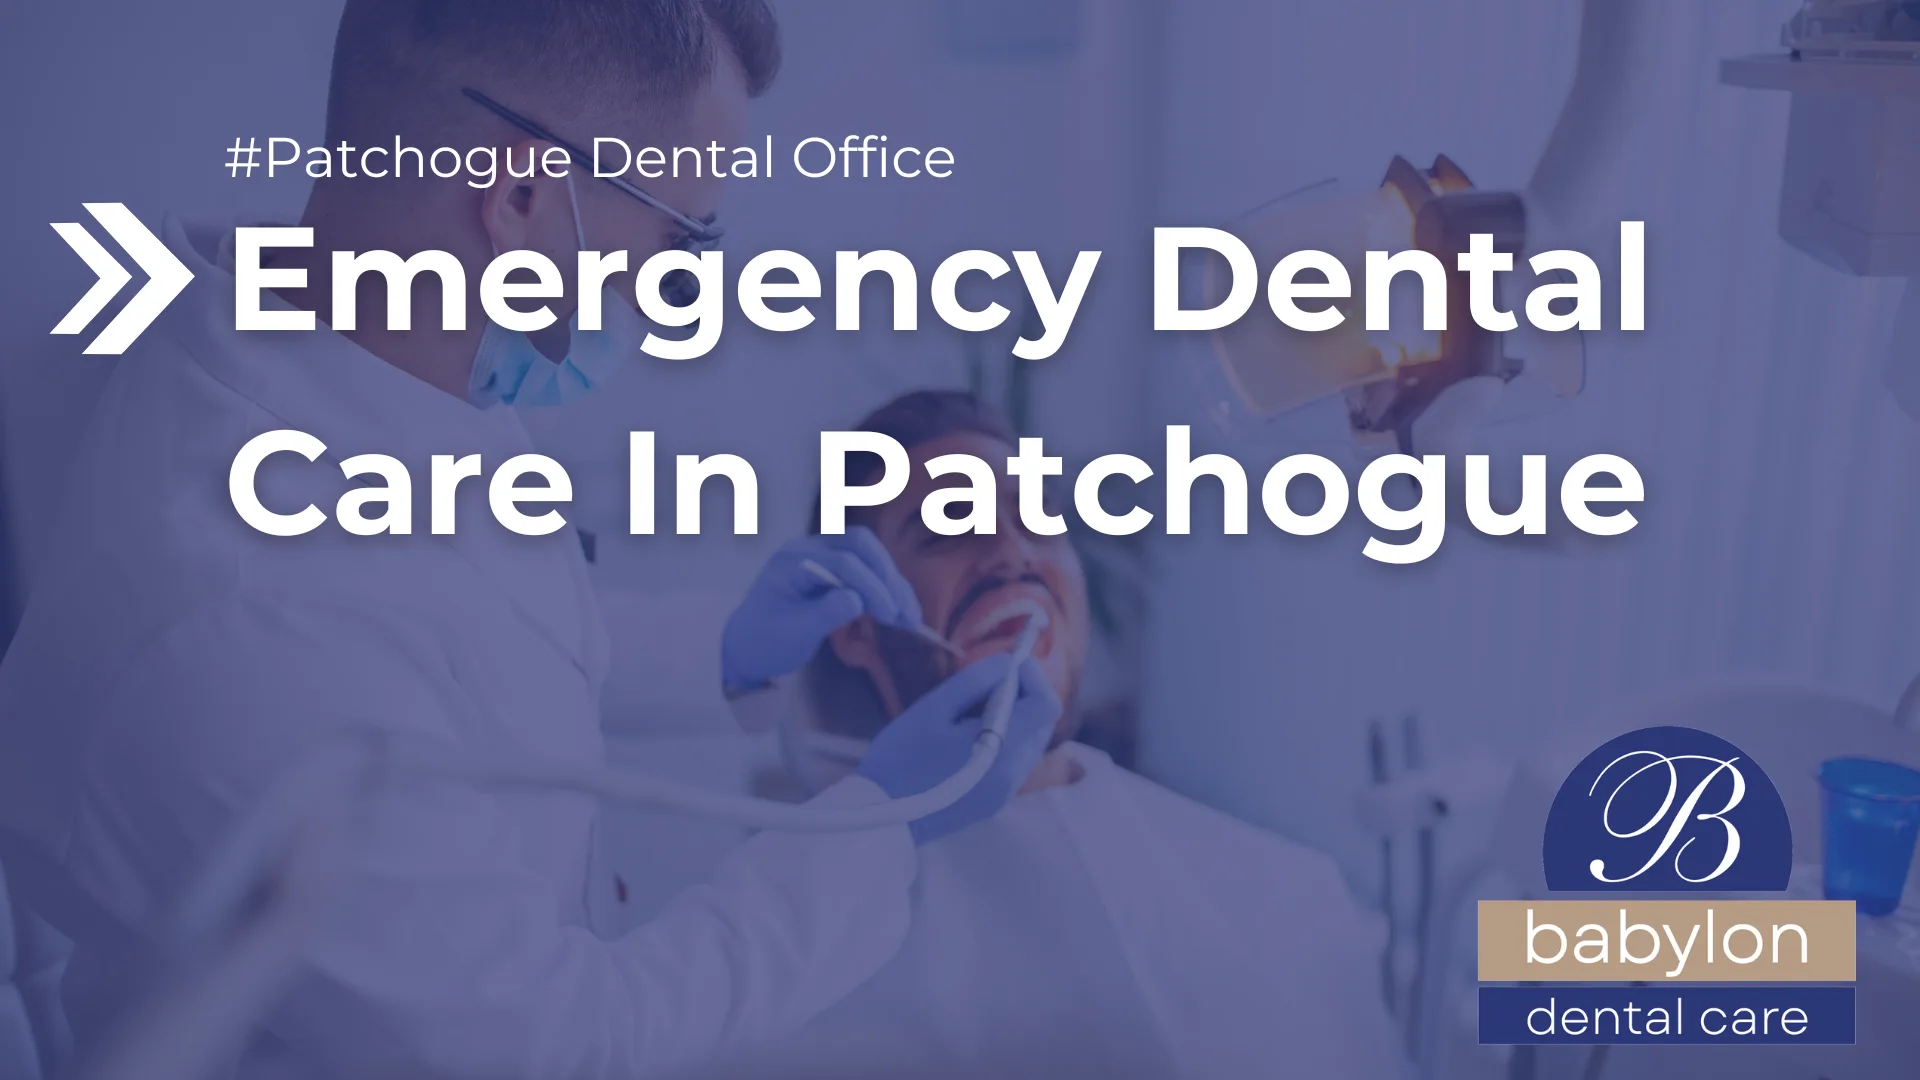 Emergency Dental Care In Patchogue Image - new logo